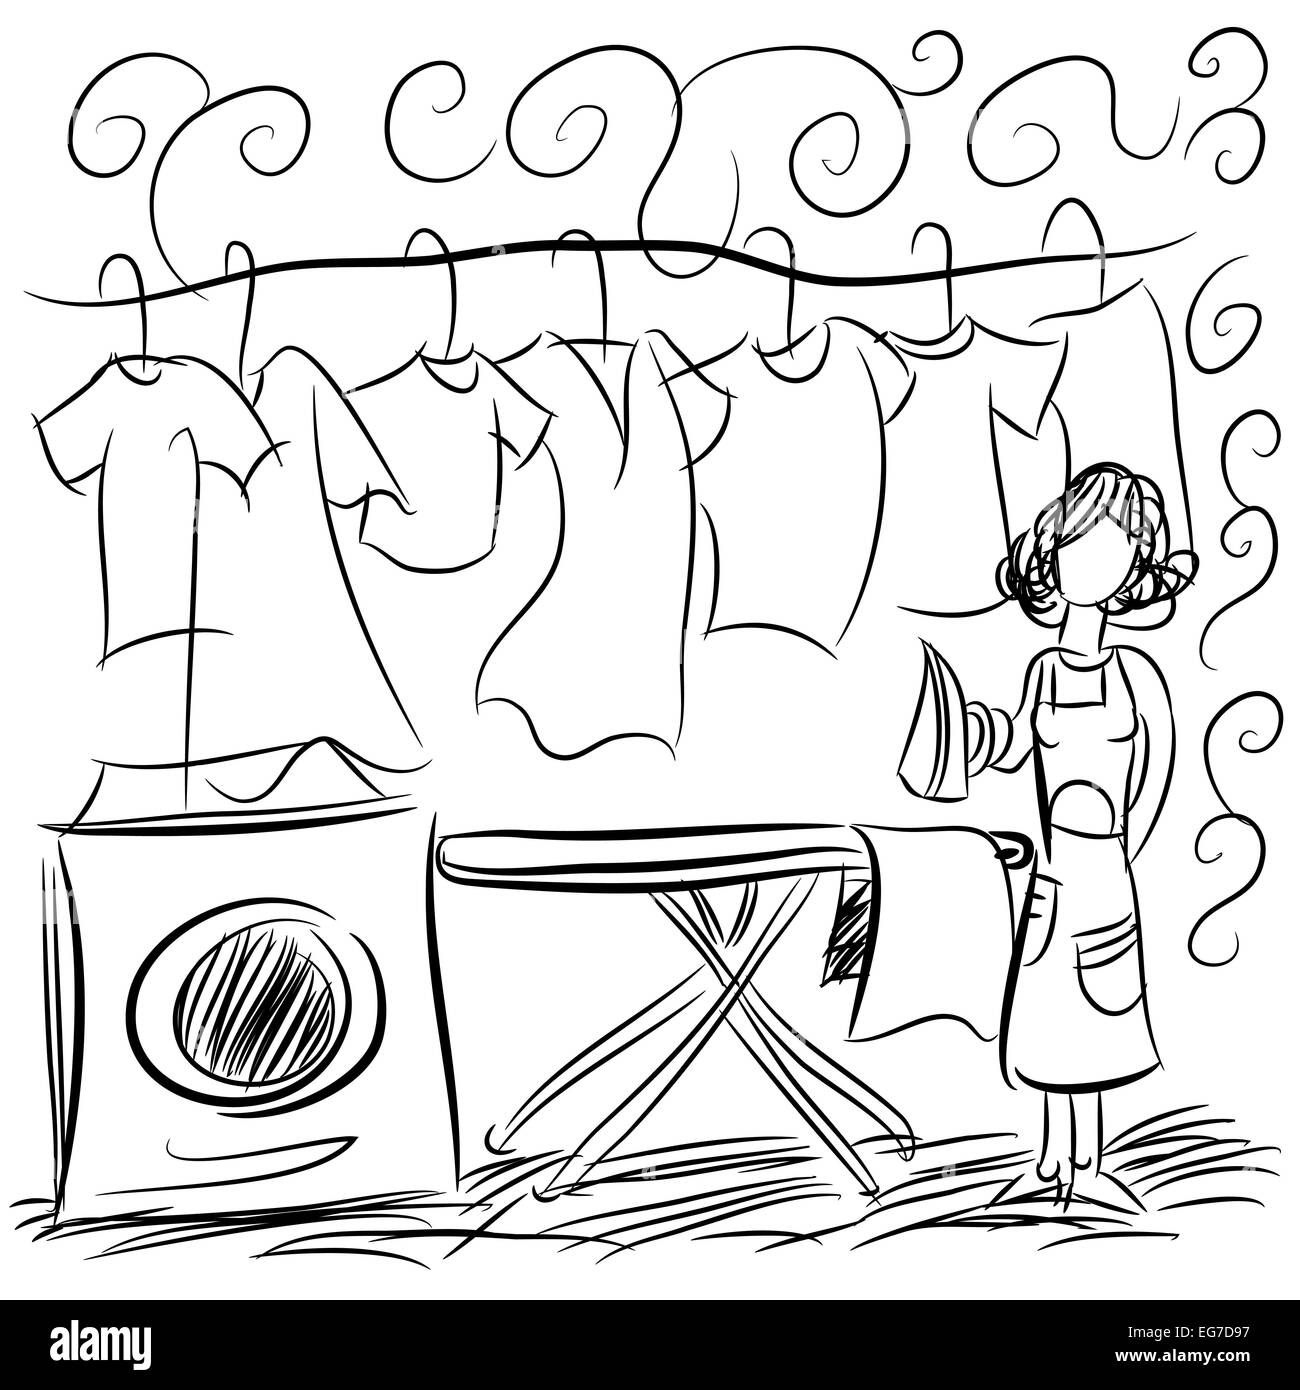 An image of a laundry service drawing. Stock Photo